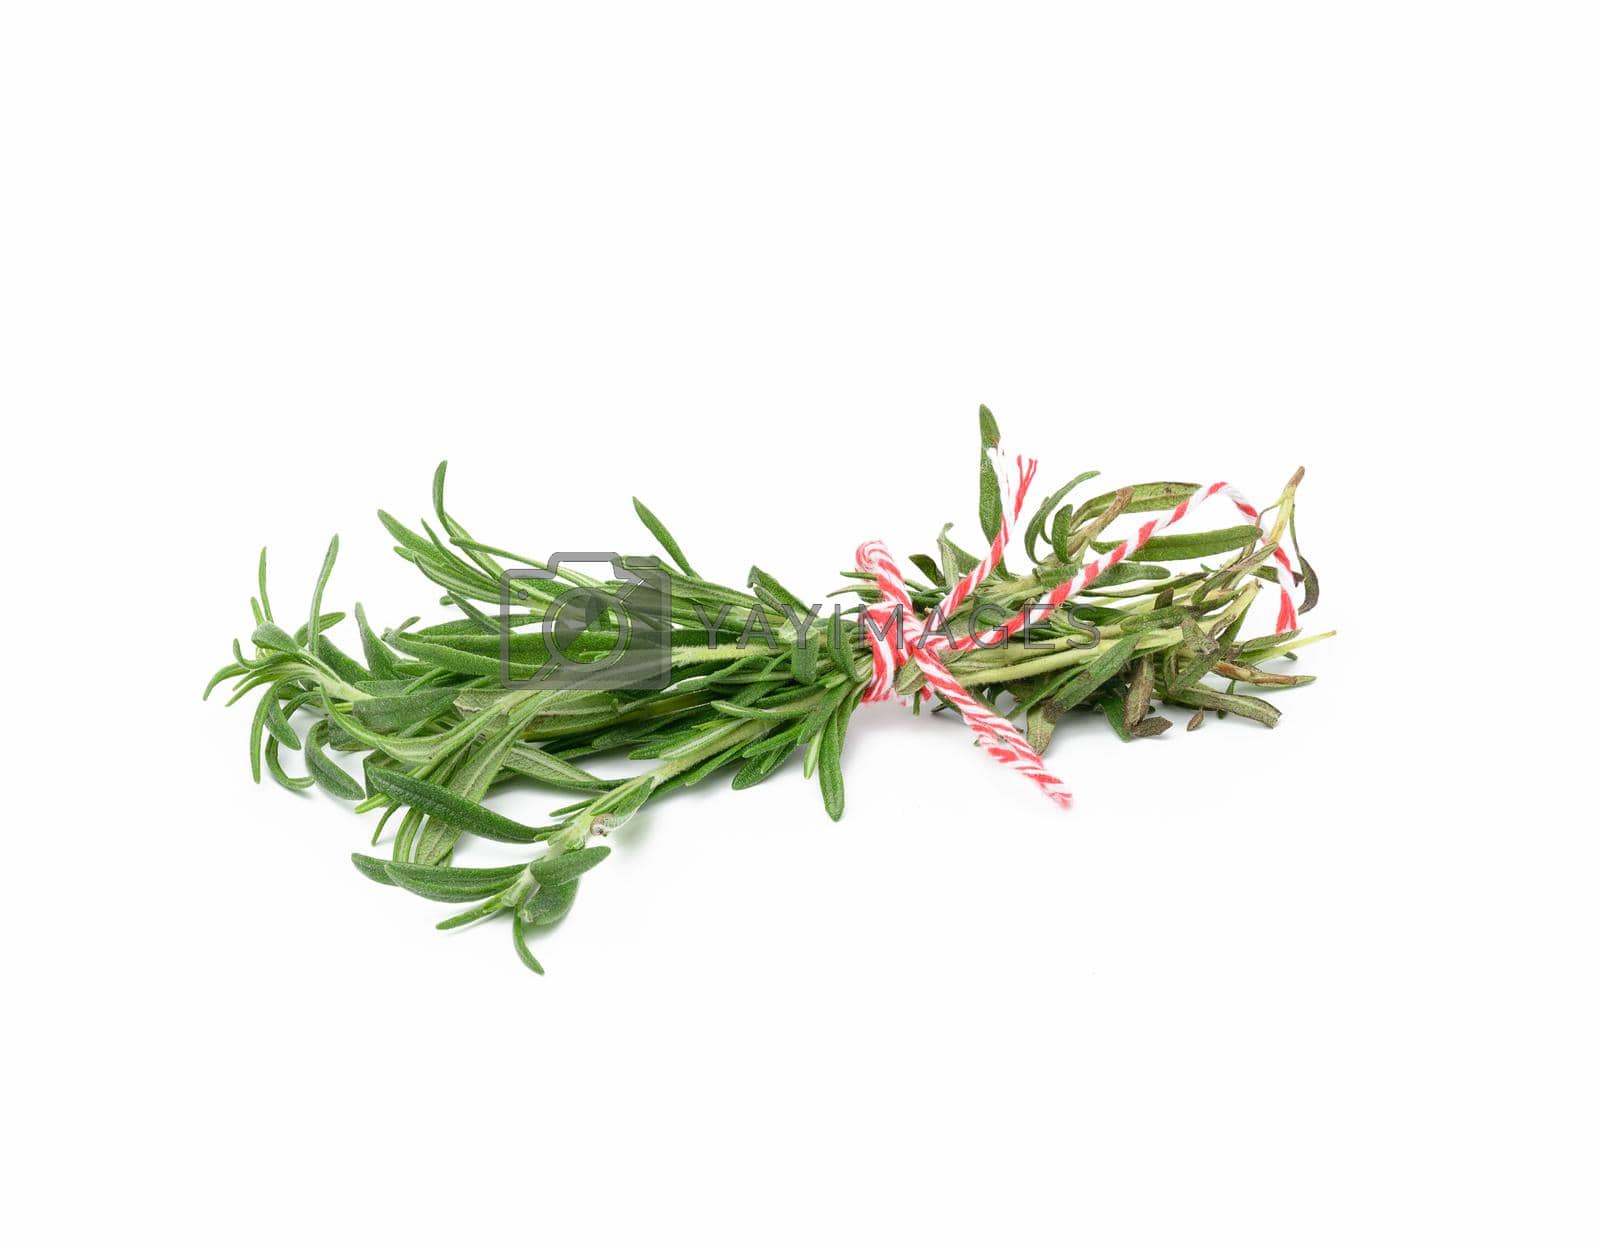 Royalty free image of fresh sprig of rosemary with green leaves on white background by ndanko